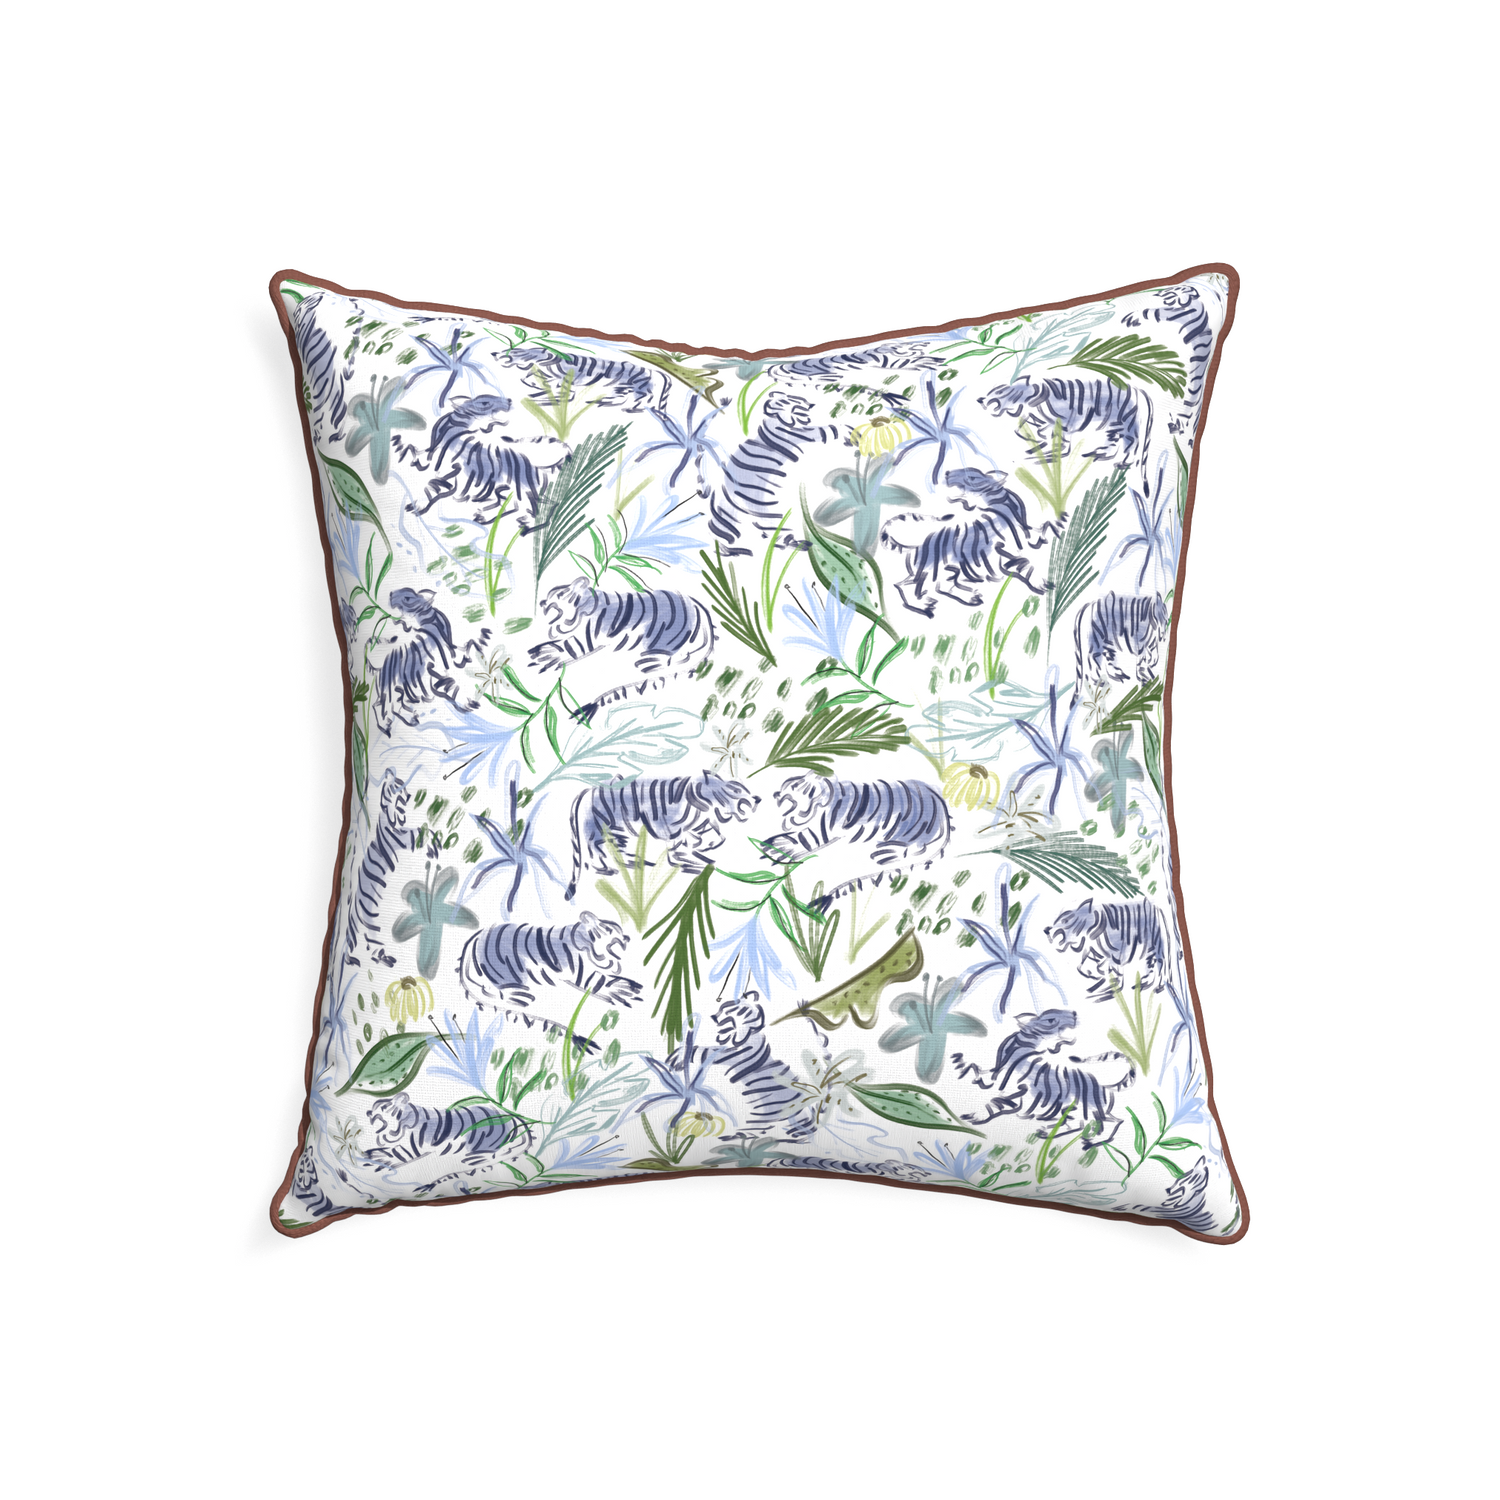 22-square frida green custom pillow with w piping on white background